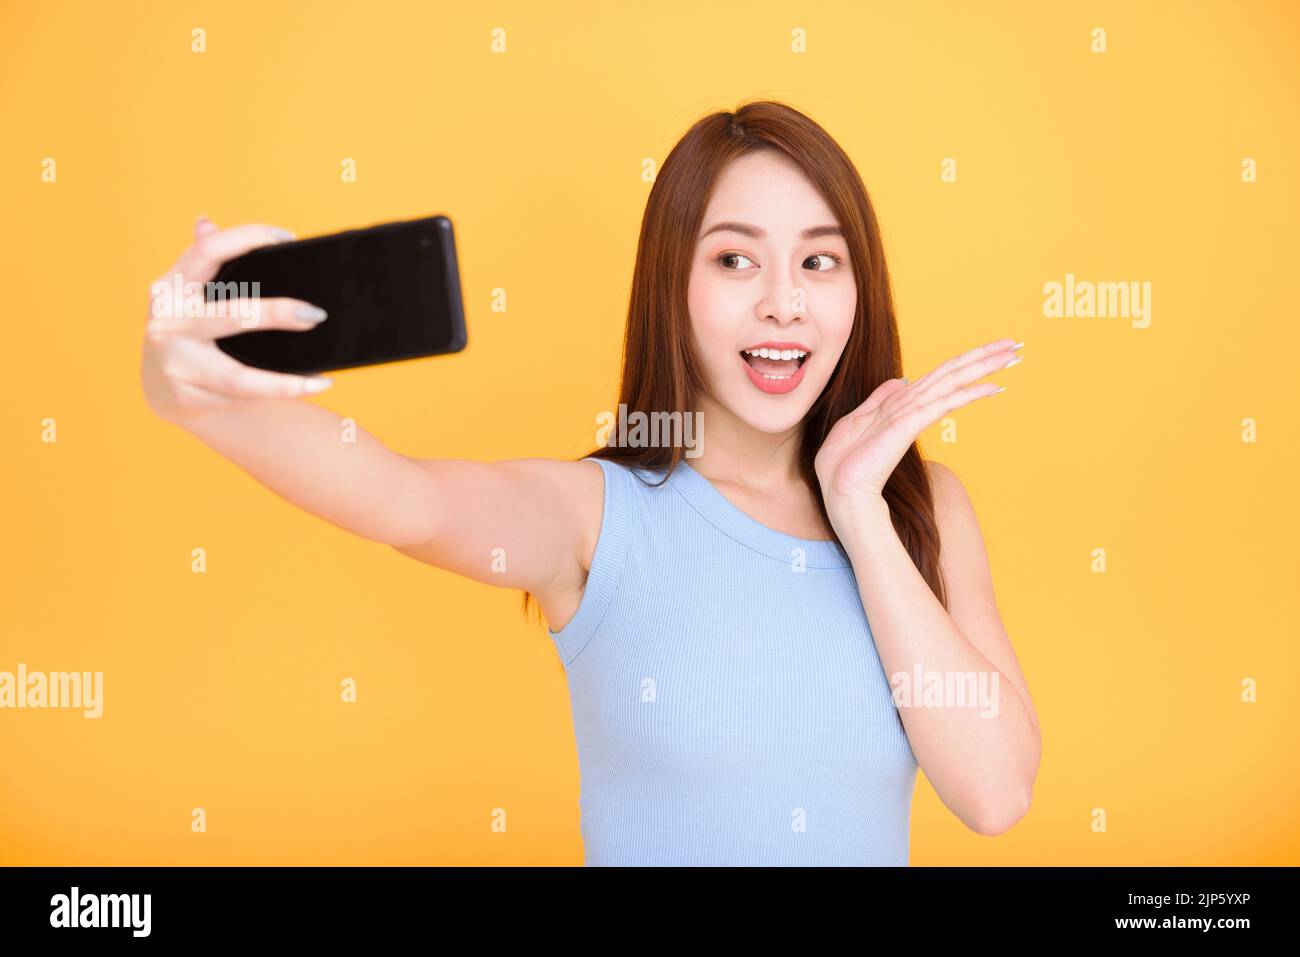 Young woman smiling and taking selfie photo on cellphone isolated over yellow background Stock Photo